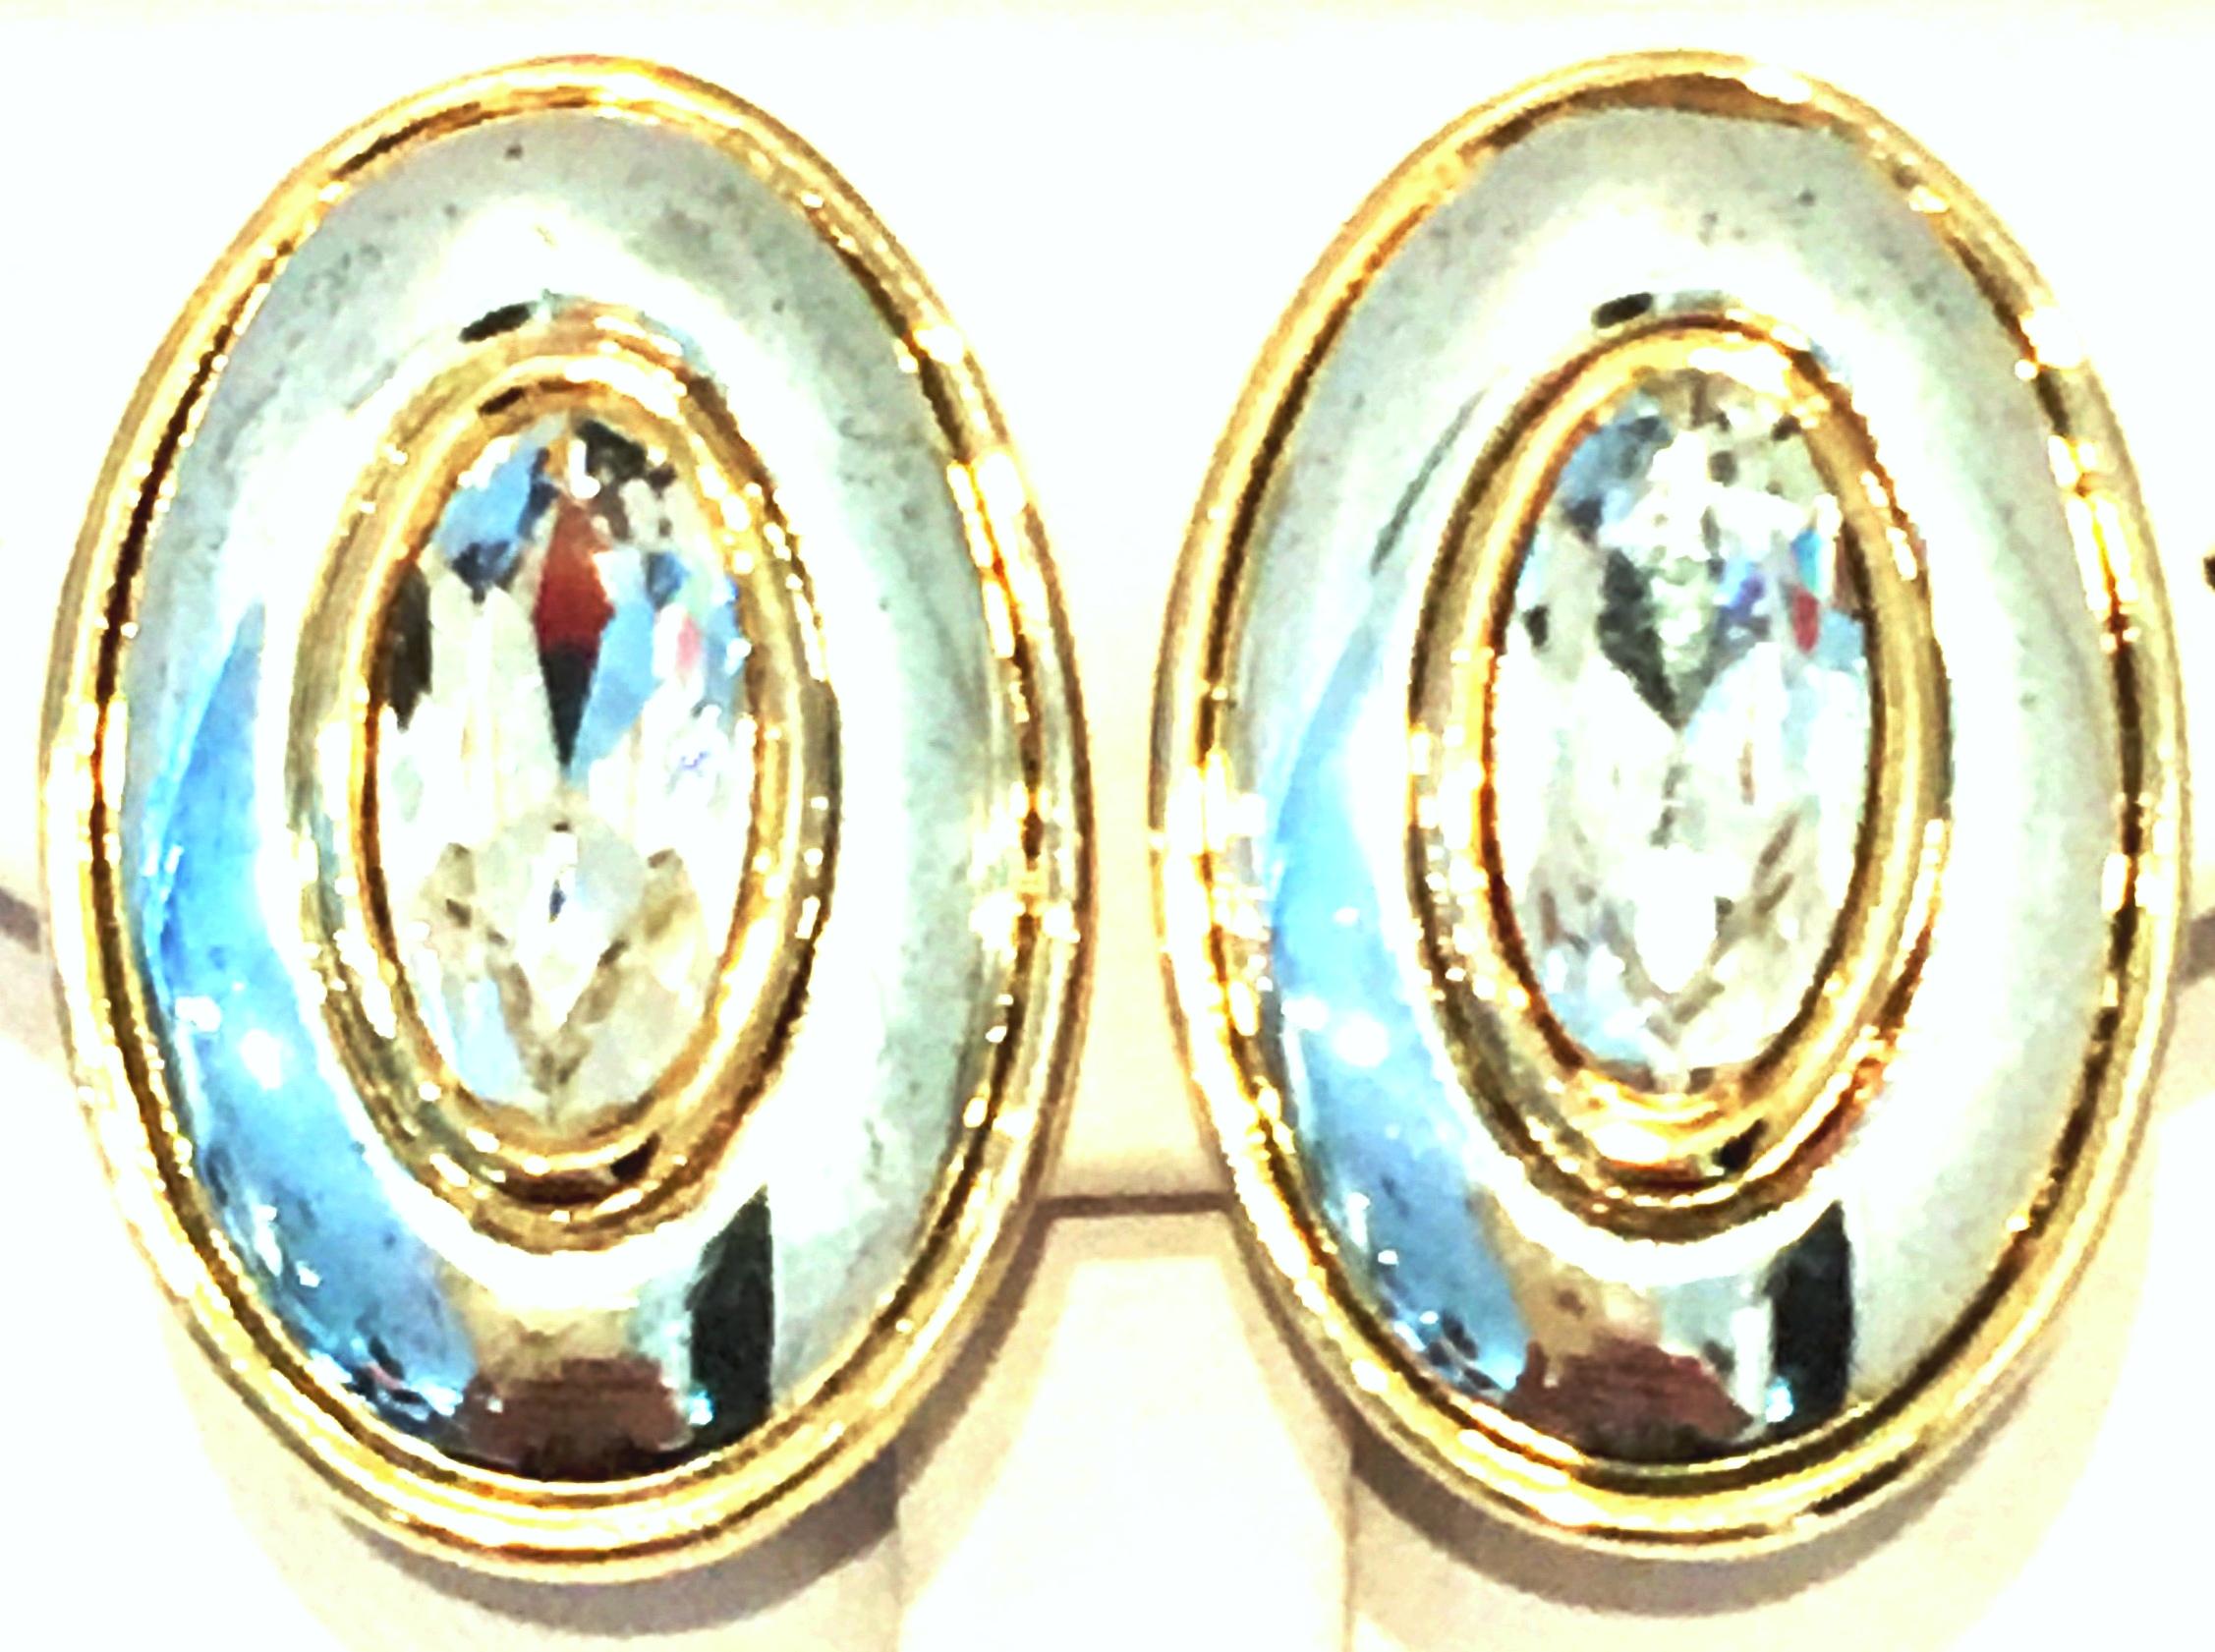 20th Century Modernist Two Tone Gold & Silver Plate Swarovski Crystal Earrings By, Givenchy. These clip style dimensional earrings features a gold plate ground with silver plate accent and cabochon set oval Swarovski crystal colorless central stone.